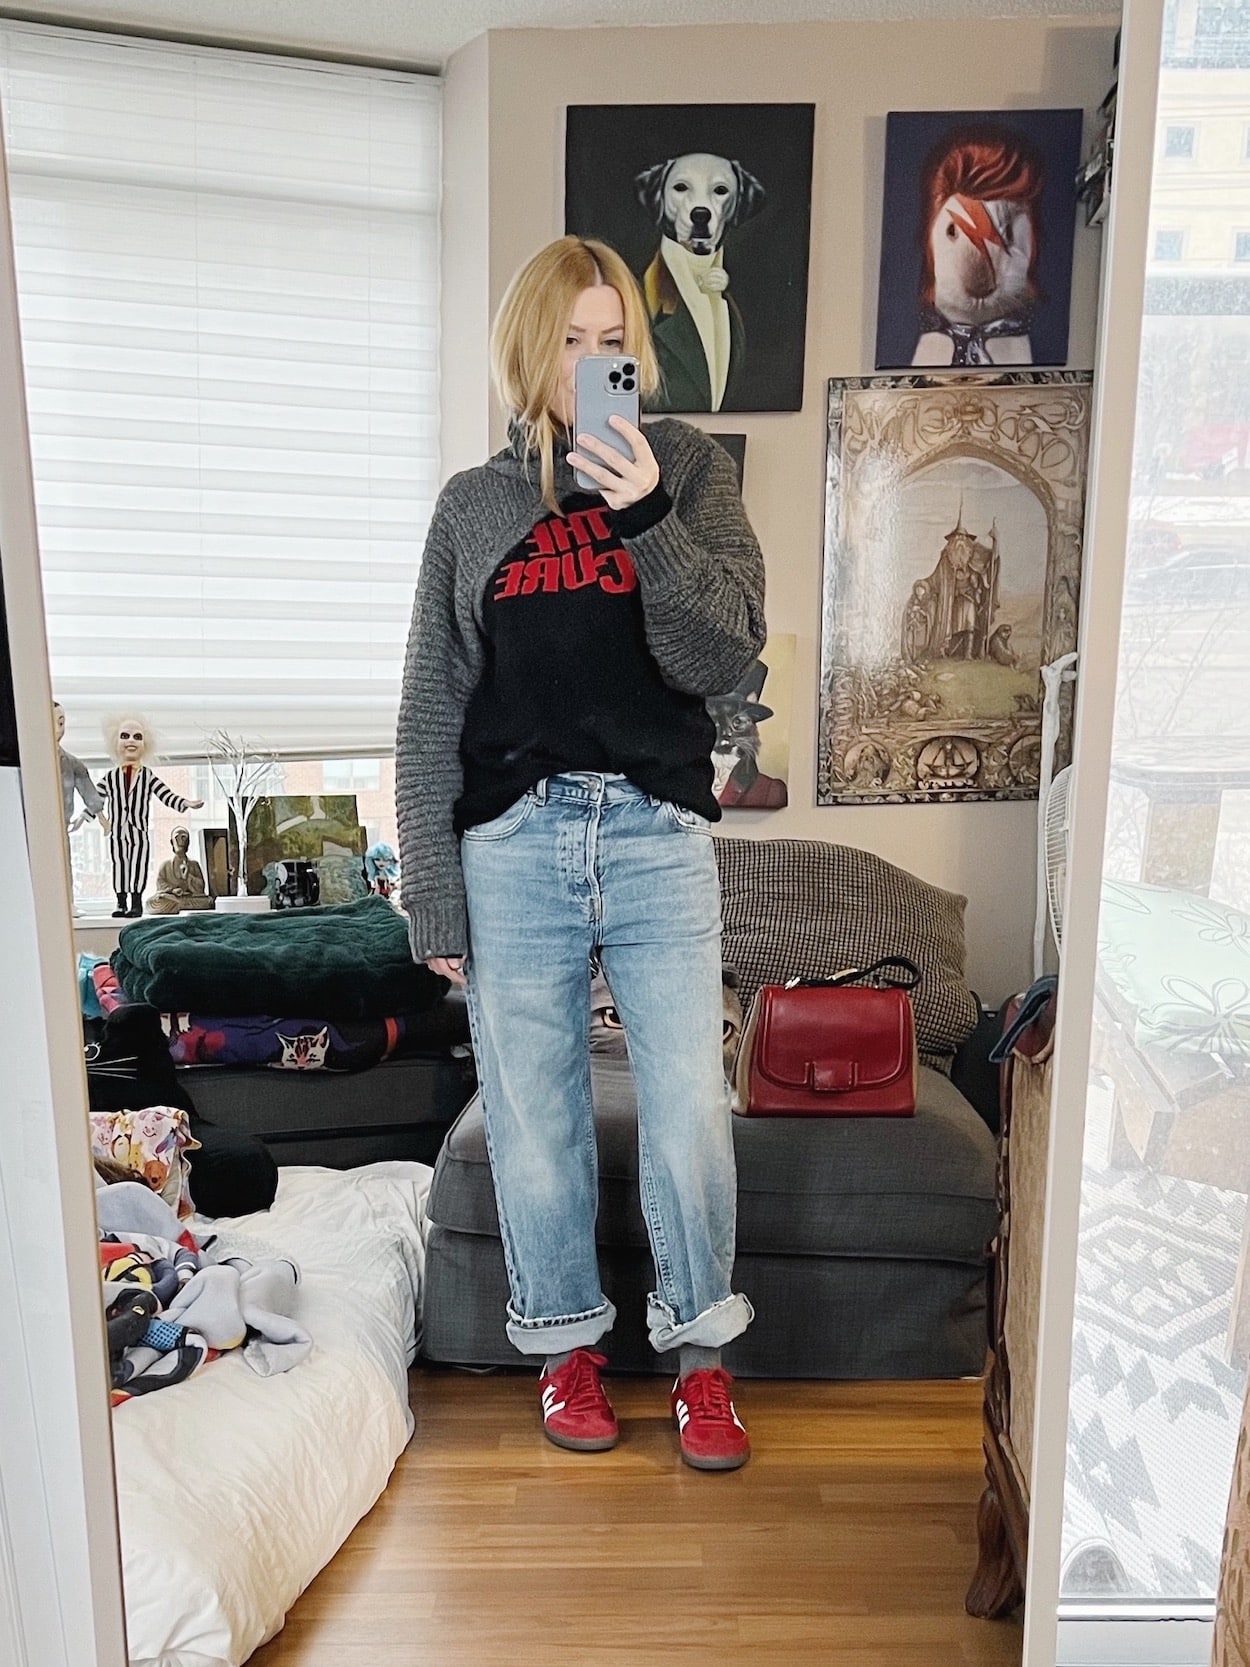 A blonde woman is wearing A Cure sweater, shrug, jeans, and red sneakers.